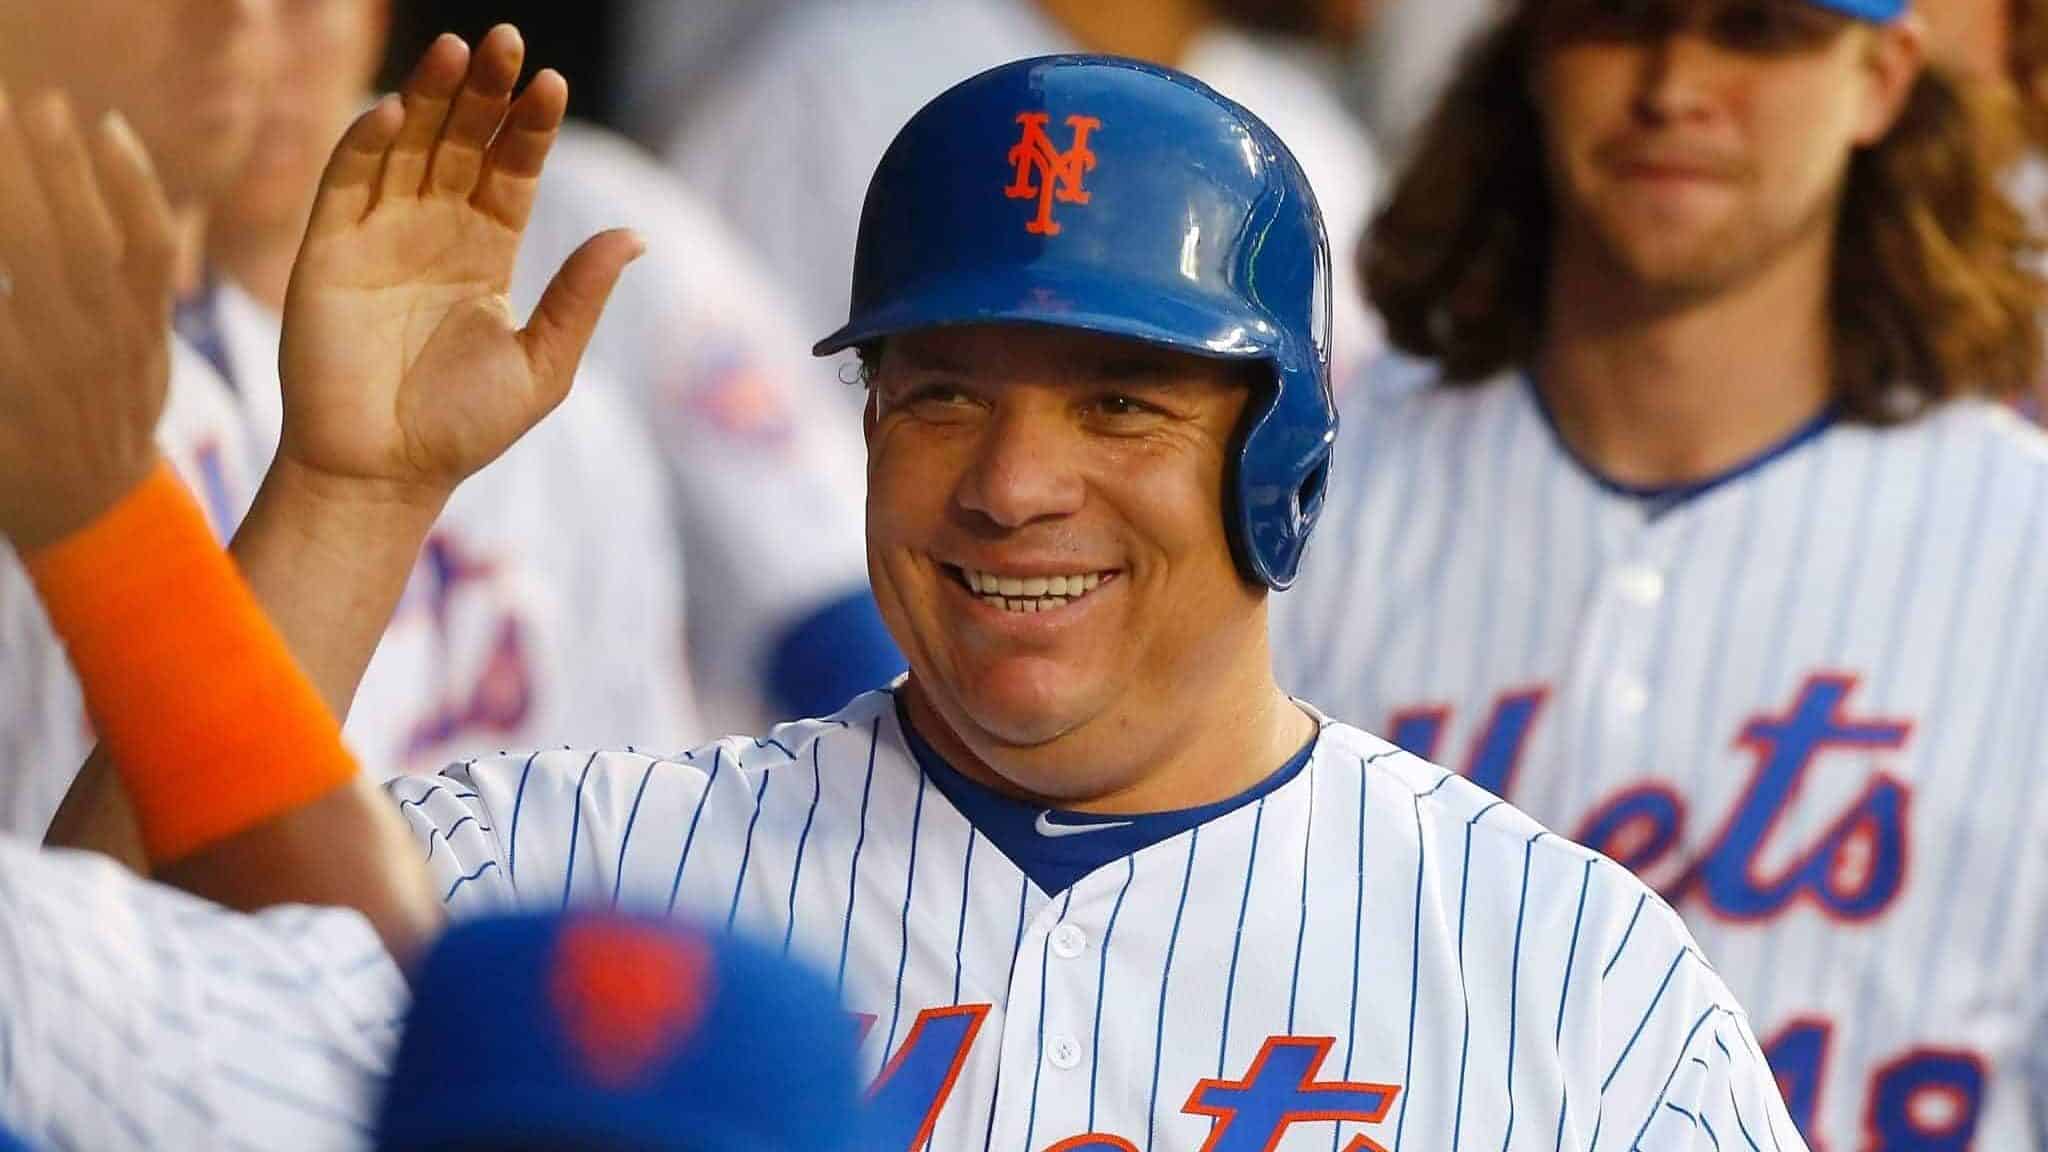 NEW YORK, NY - JUNE 16: Bartolo Colon #40 of the New York Mets celebrates in the dugout after scoring a third-inning run against the Pittsburgh Pirates at Citi Field on June 16, 2016 in the Flushing neighborhood of the Queens borough of New York City.